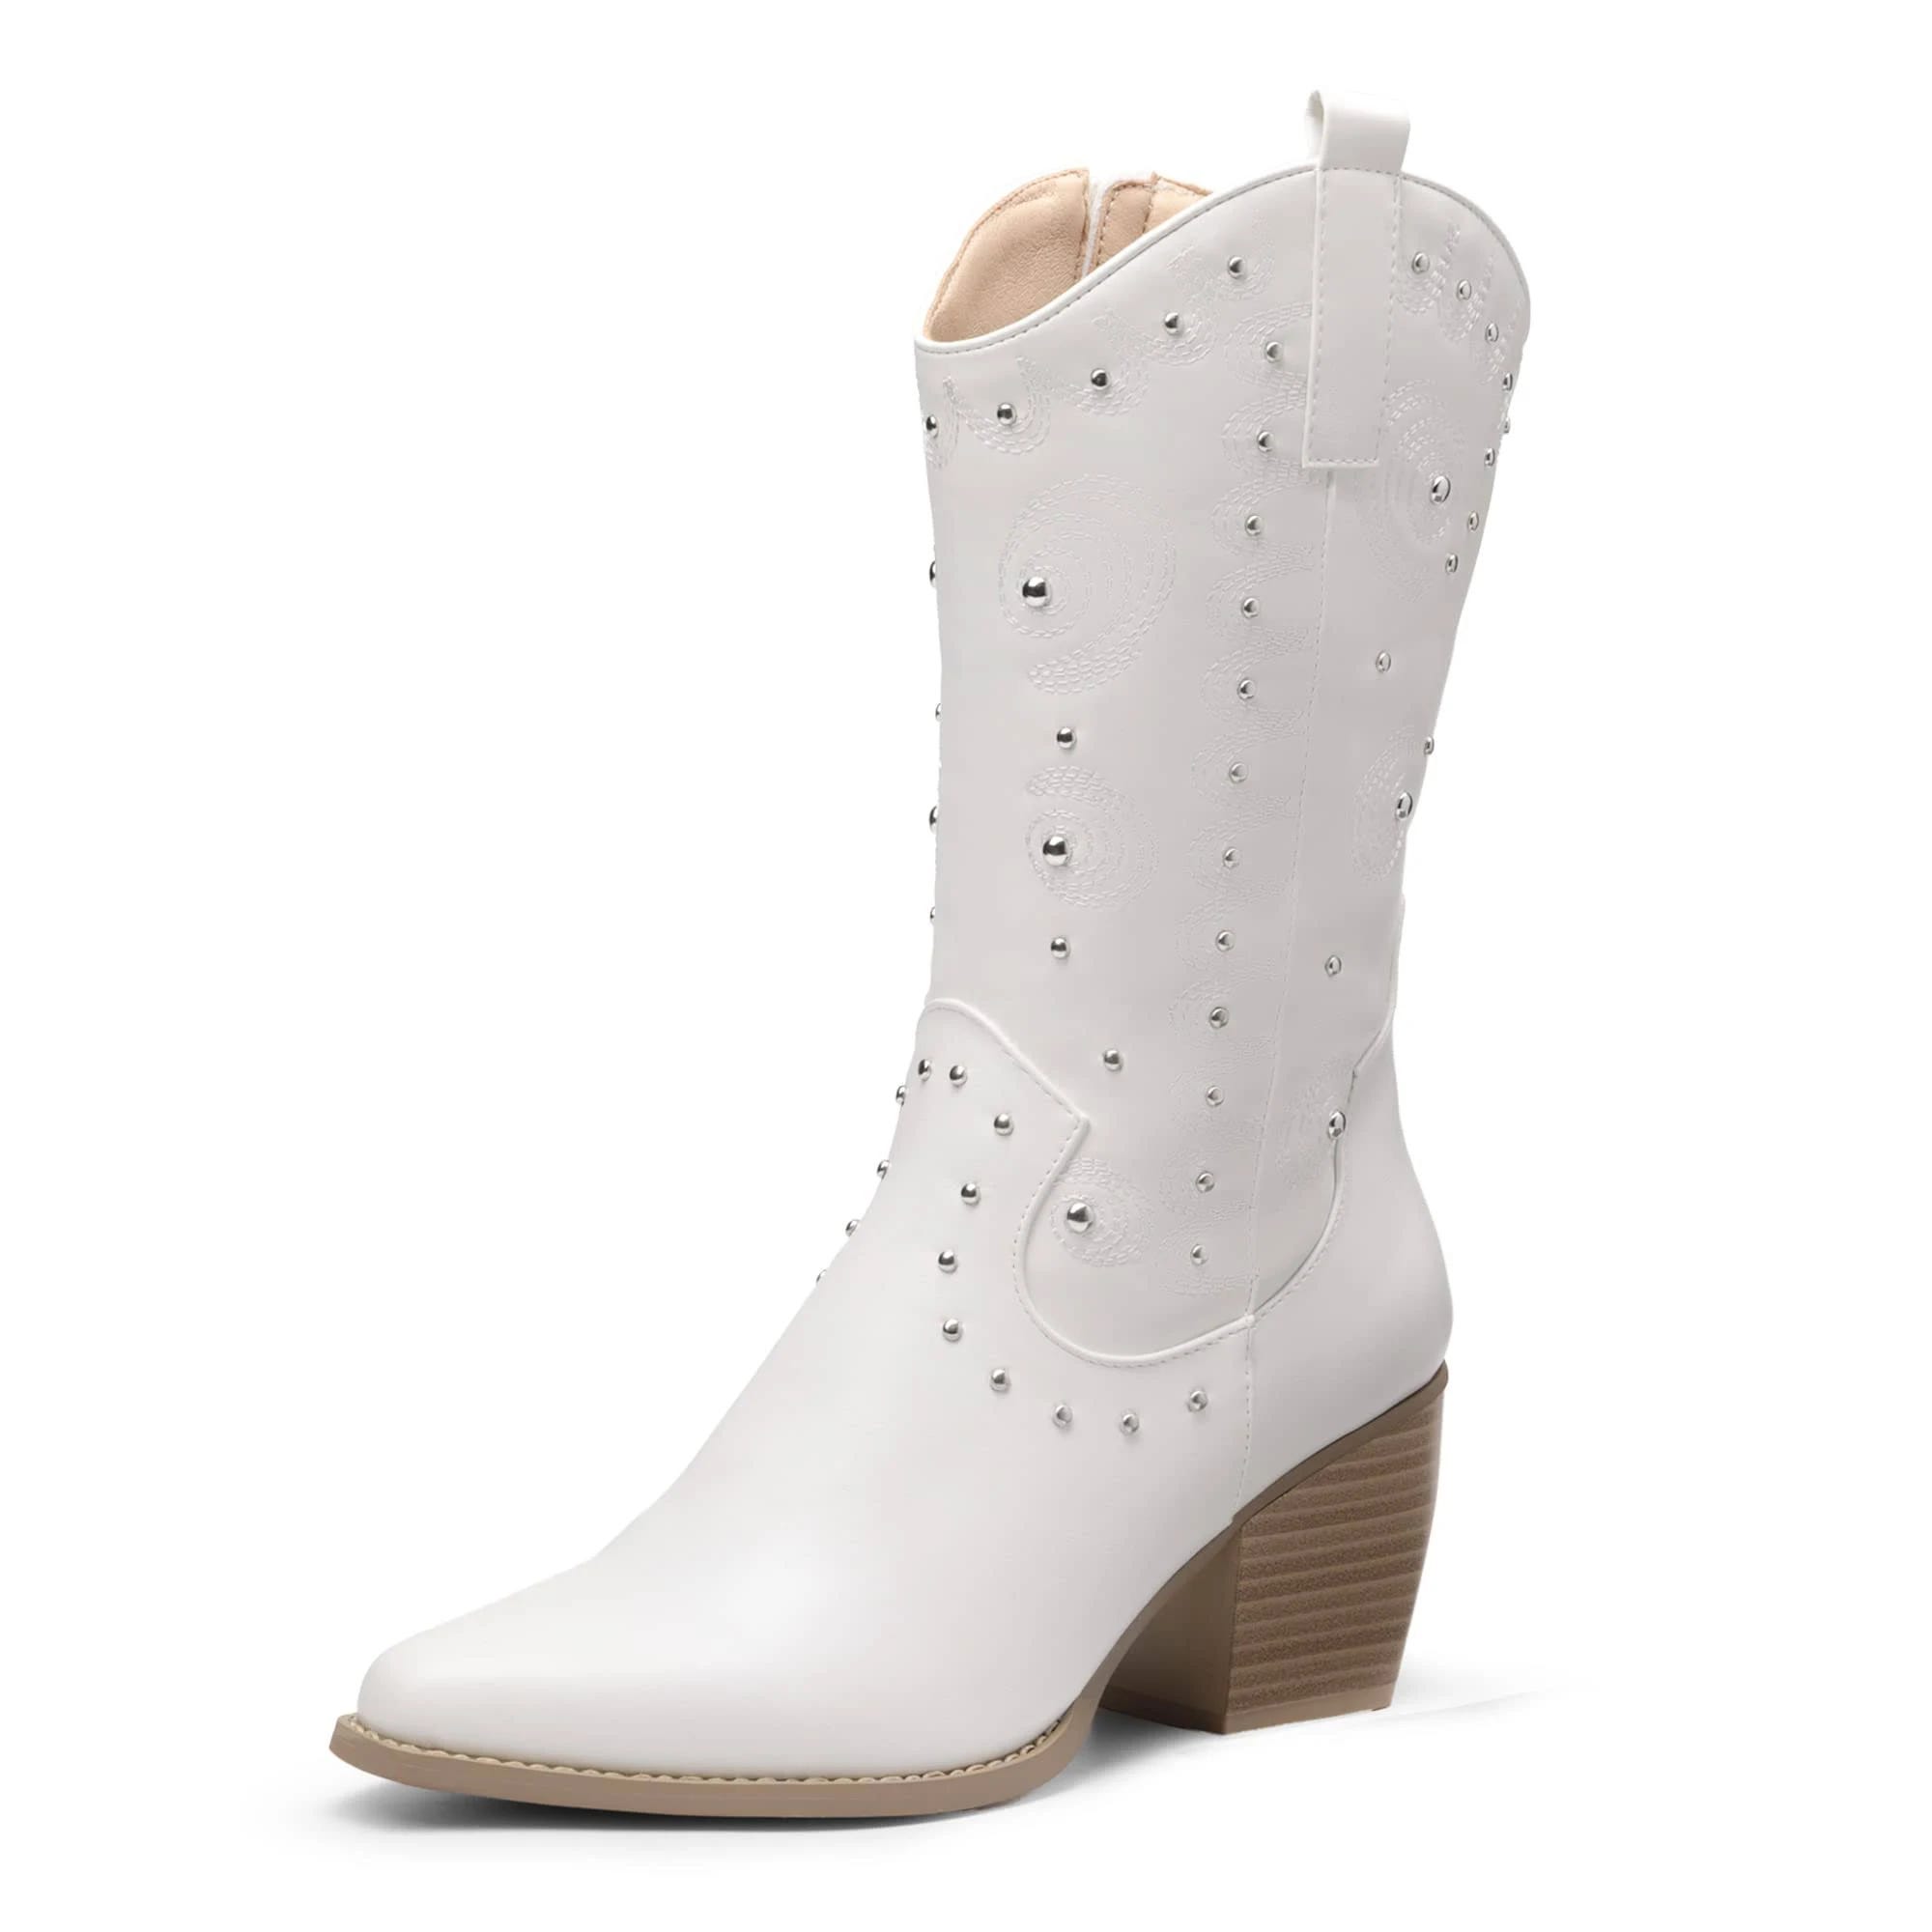 Stylish White Western Mid Calf Cowboy Boots with PU Shaft and Block Heel | Image